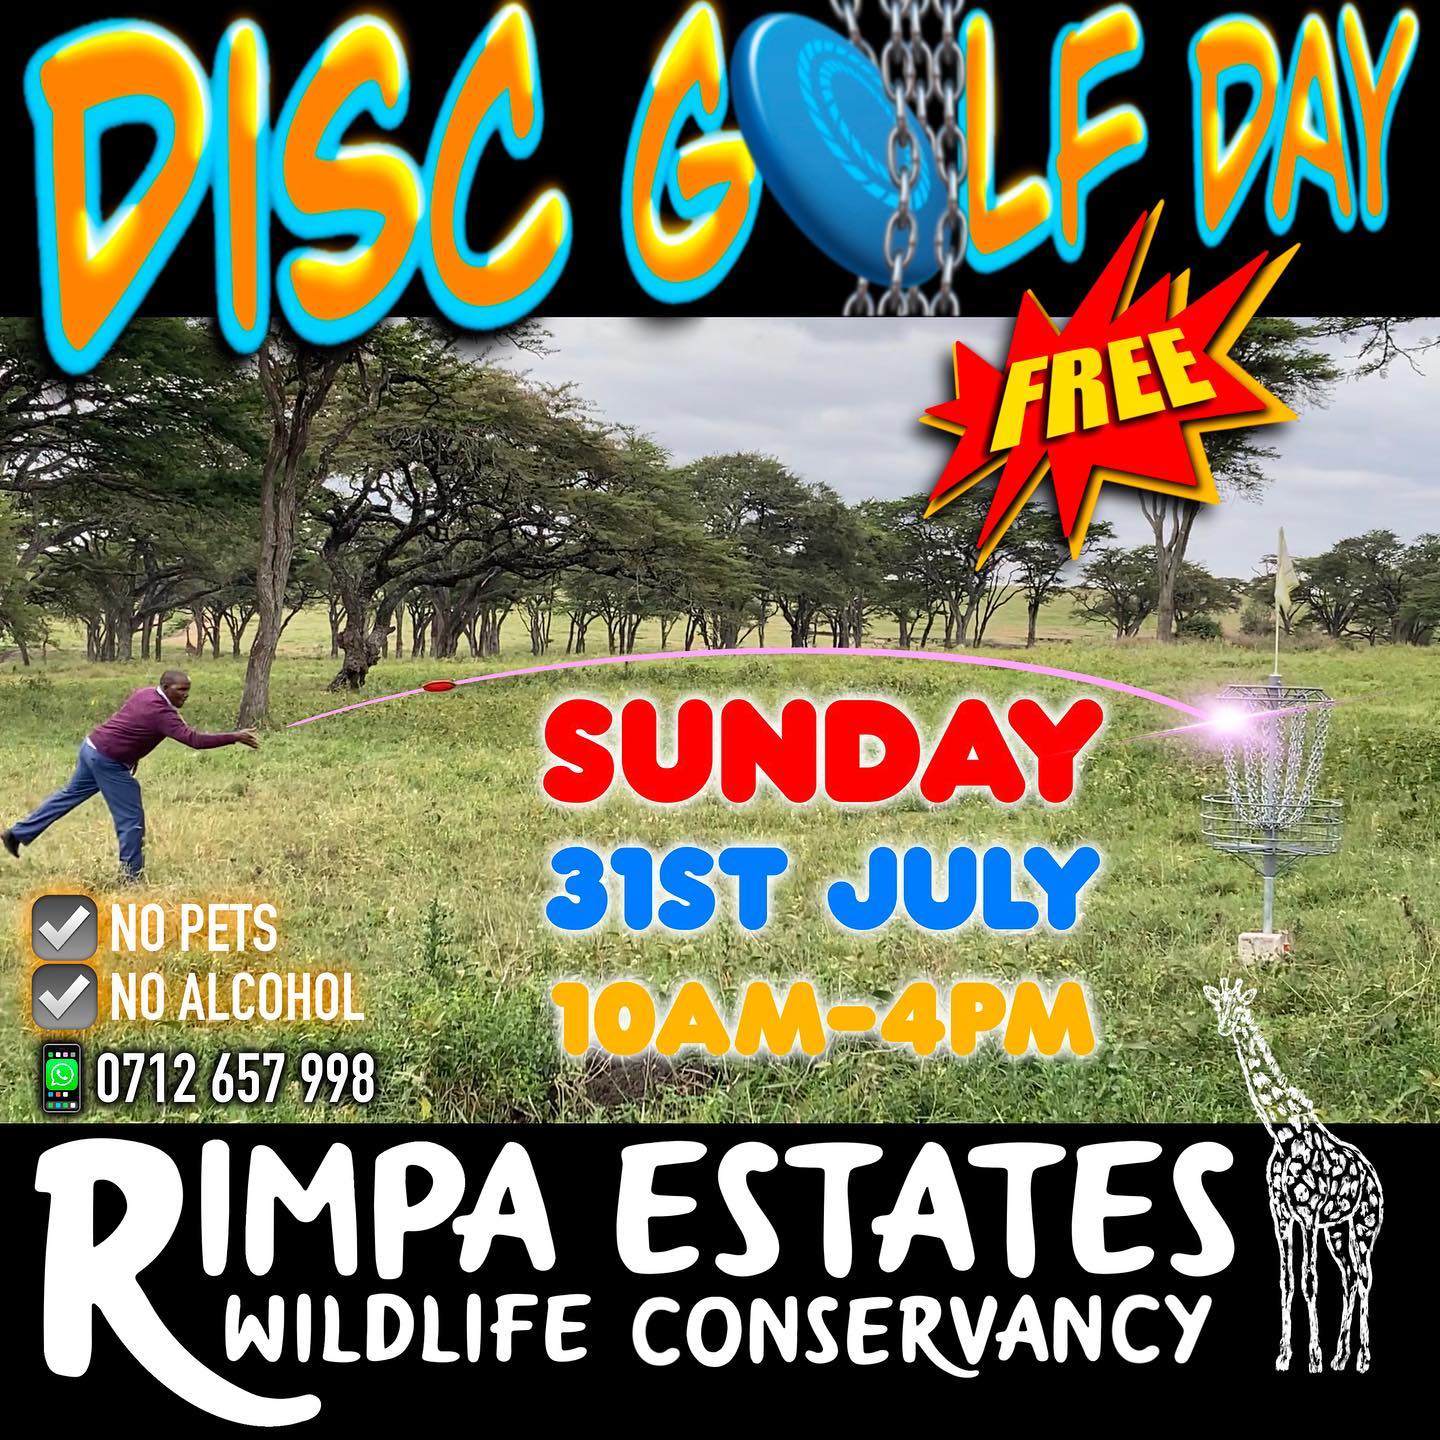 🗓 Sunday, 31st of July

⏰ 10am to 4pm

📍 The Reserve at Rimpa Estates Wildlife Conservancy

👨‍👩‍👦‍👦 Great for kids and families 

🥪 Bring food and have a picnic

🚫 No pets or alcohol 

❓call or WhatsApp 0712 657 998

#discgolfkenya #discgolf #kenya #nairobi #karenkenya #discgolfafrica #playdiscgolf #kenyafamily #learndiscgolf #kenyapicnic #kenyasafari